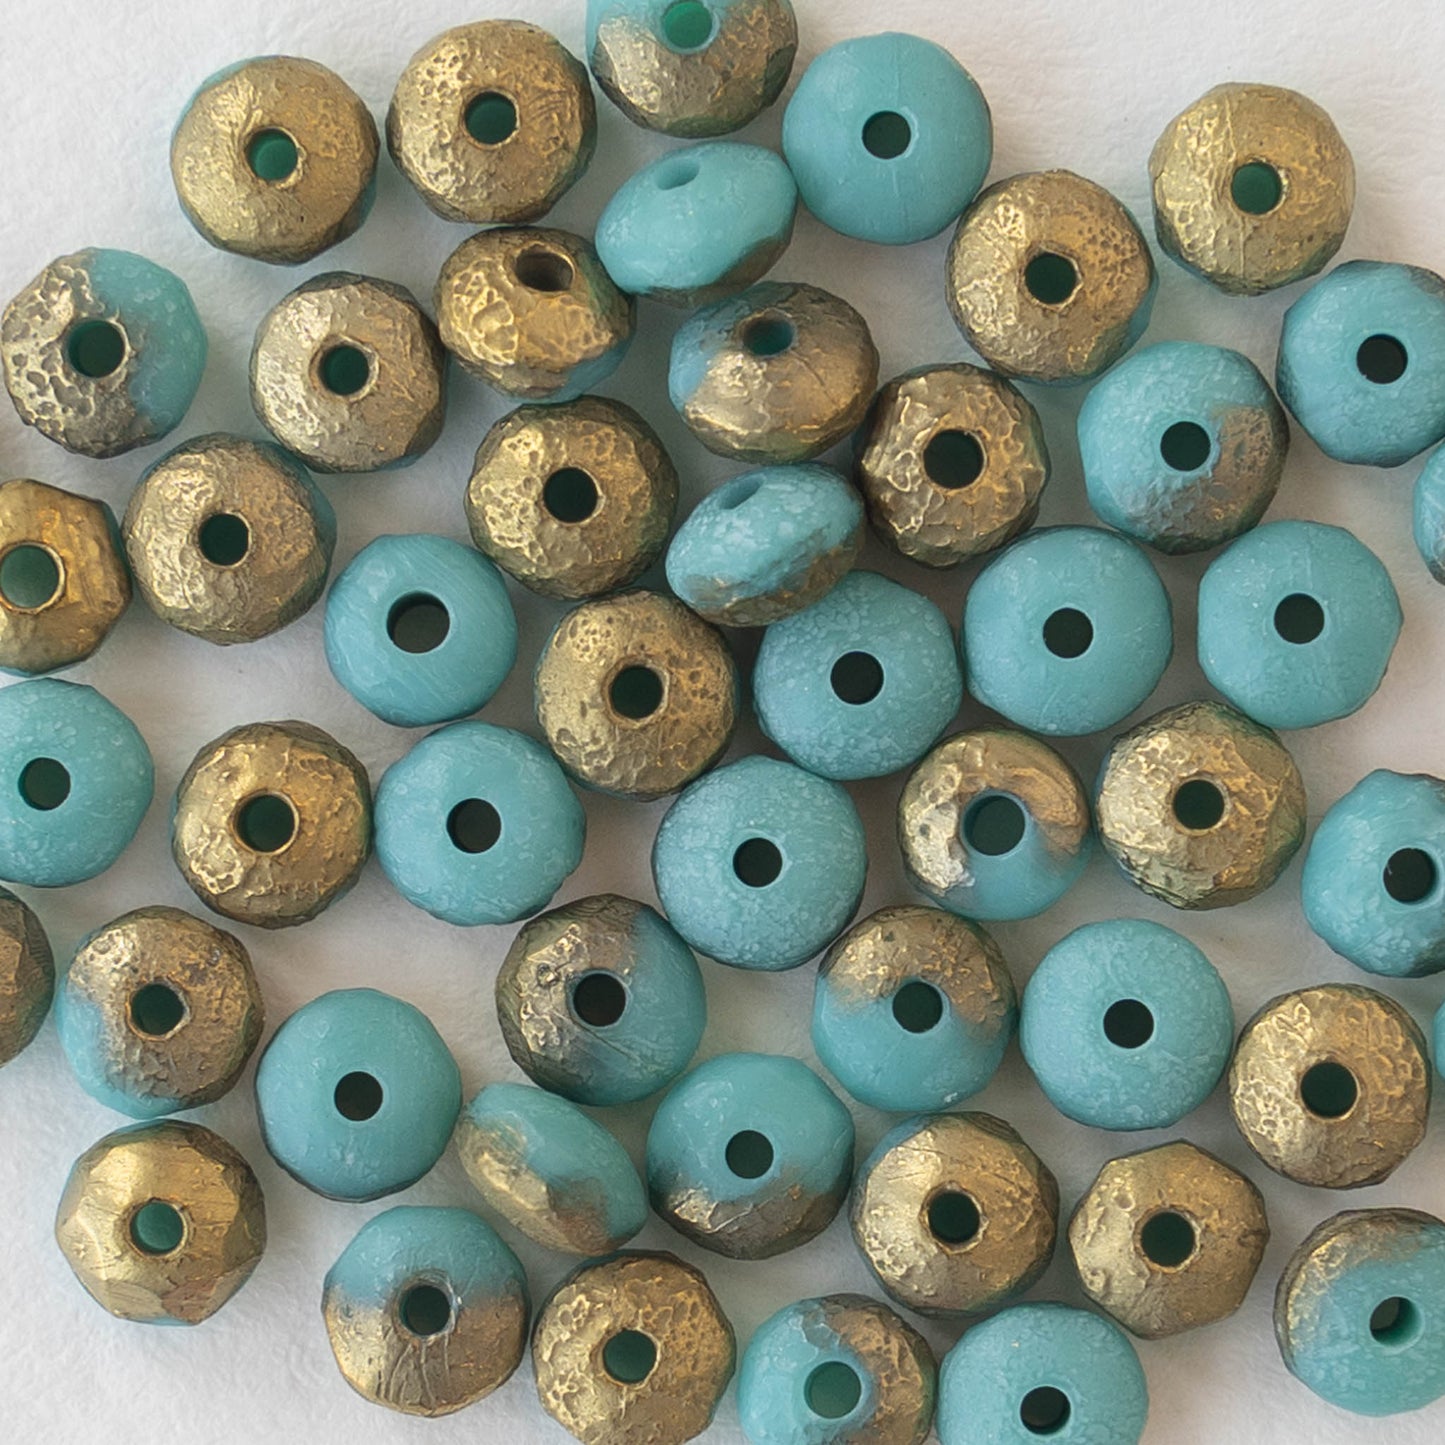 3x4mm Faceted Rondelle Beads - Opaque Etched Turquoise with Gold  - 50 beads